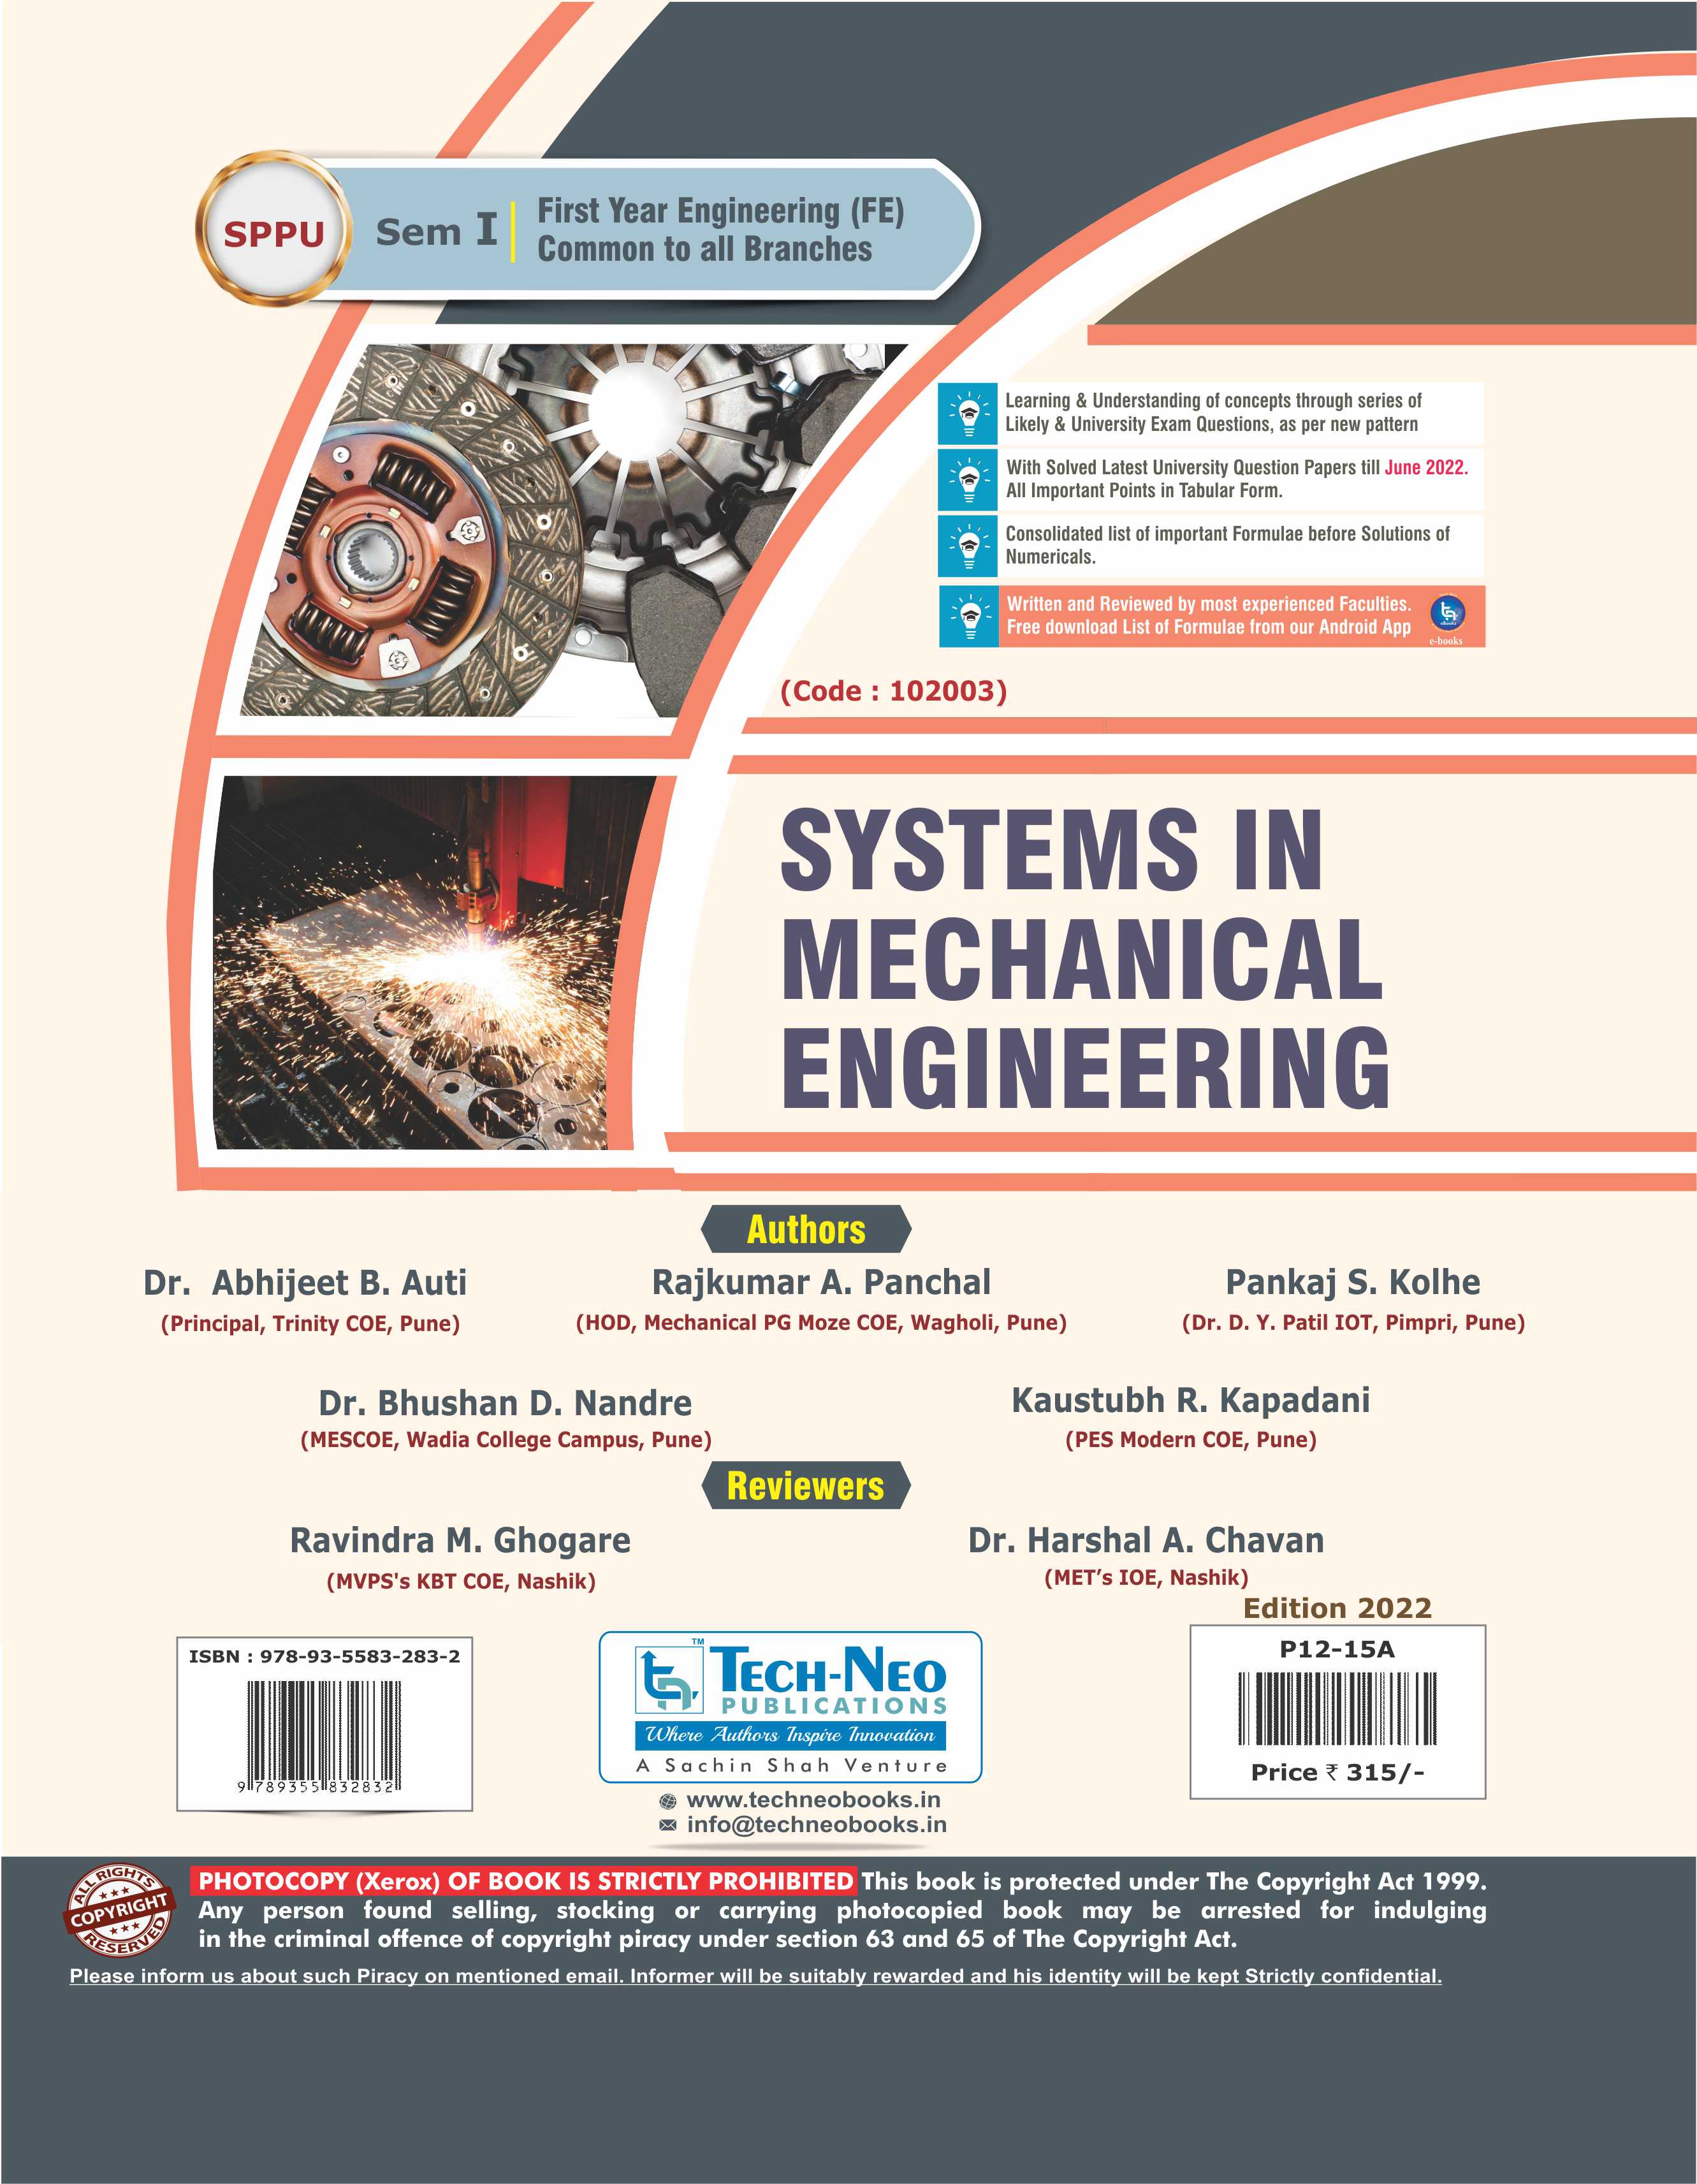 Systems in Mechanical Engineering